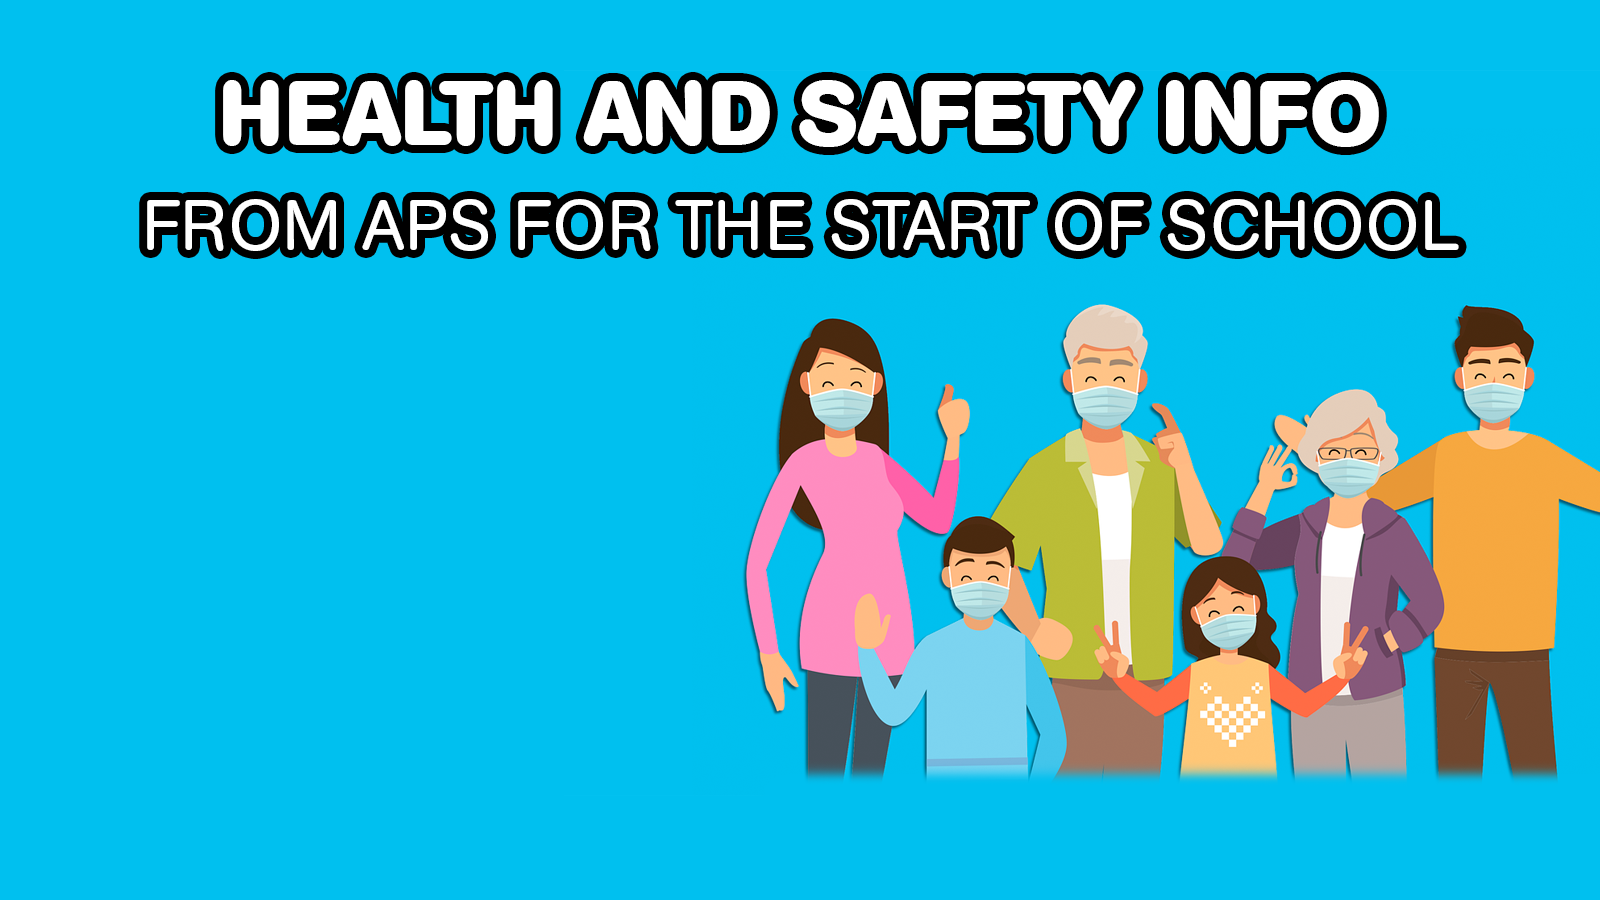 Health and safety information from APS for the start of school